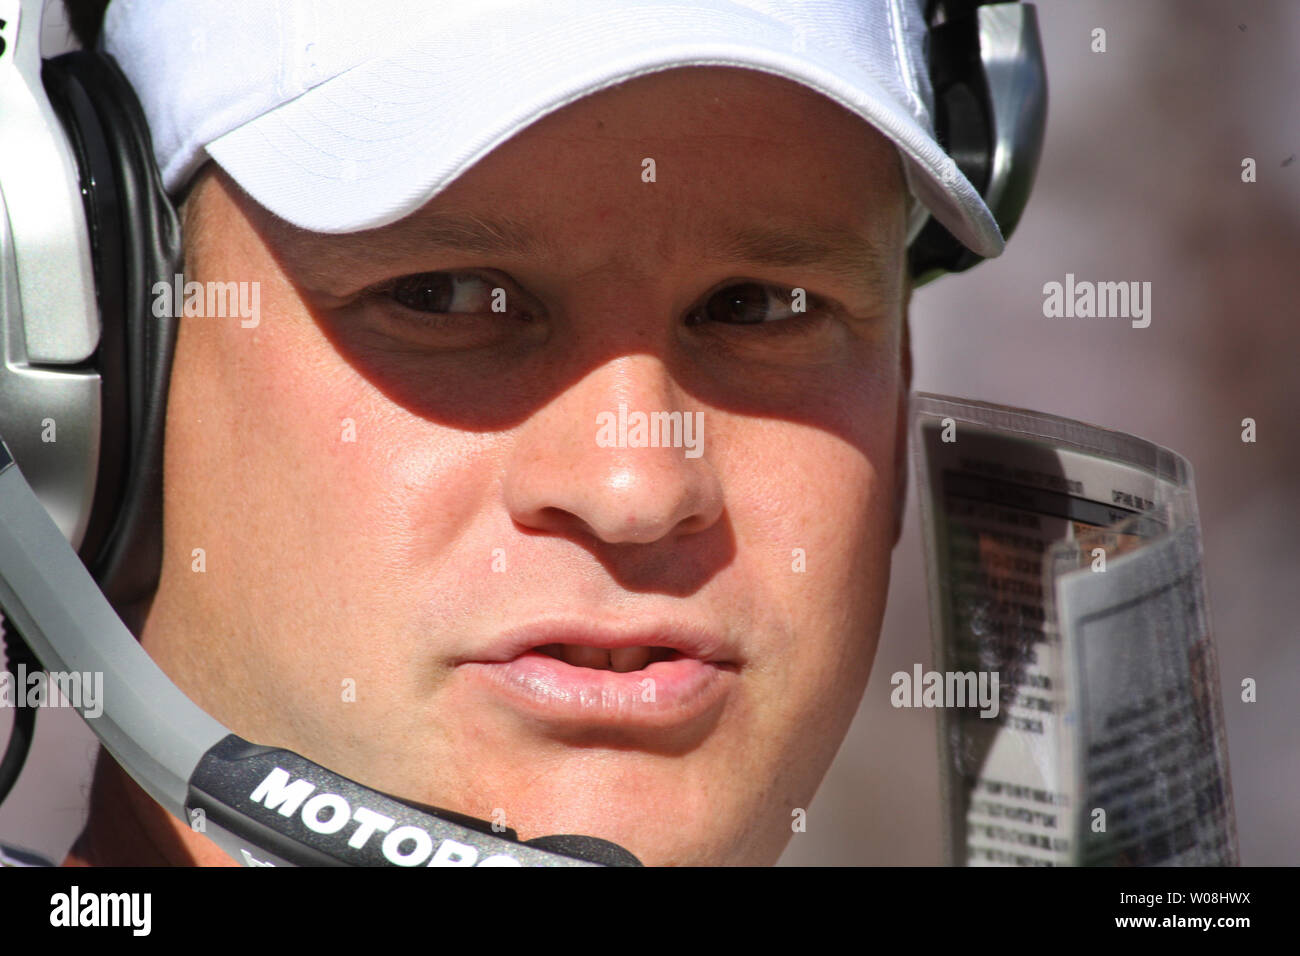 Oakland Raiders Head Coach Lane Kiffin directs his team against the Kansas City Chiefs at Network Associates Coliseum in Oakland, California on October 21, 2007. The Chiefs defeated the Raiders 12-10.   (UPI Photo/Terry Schmitt) Stock Photo